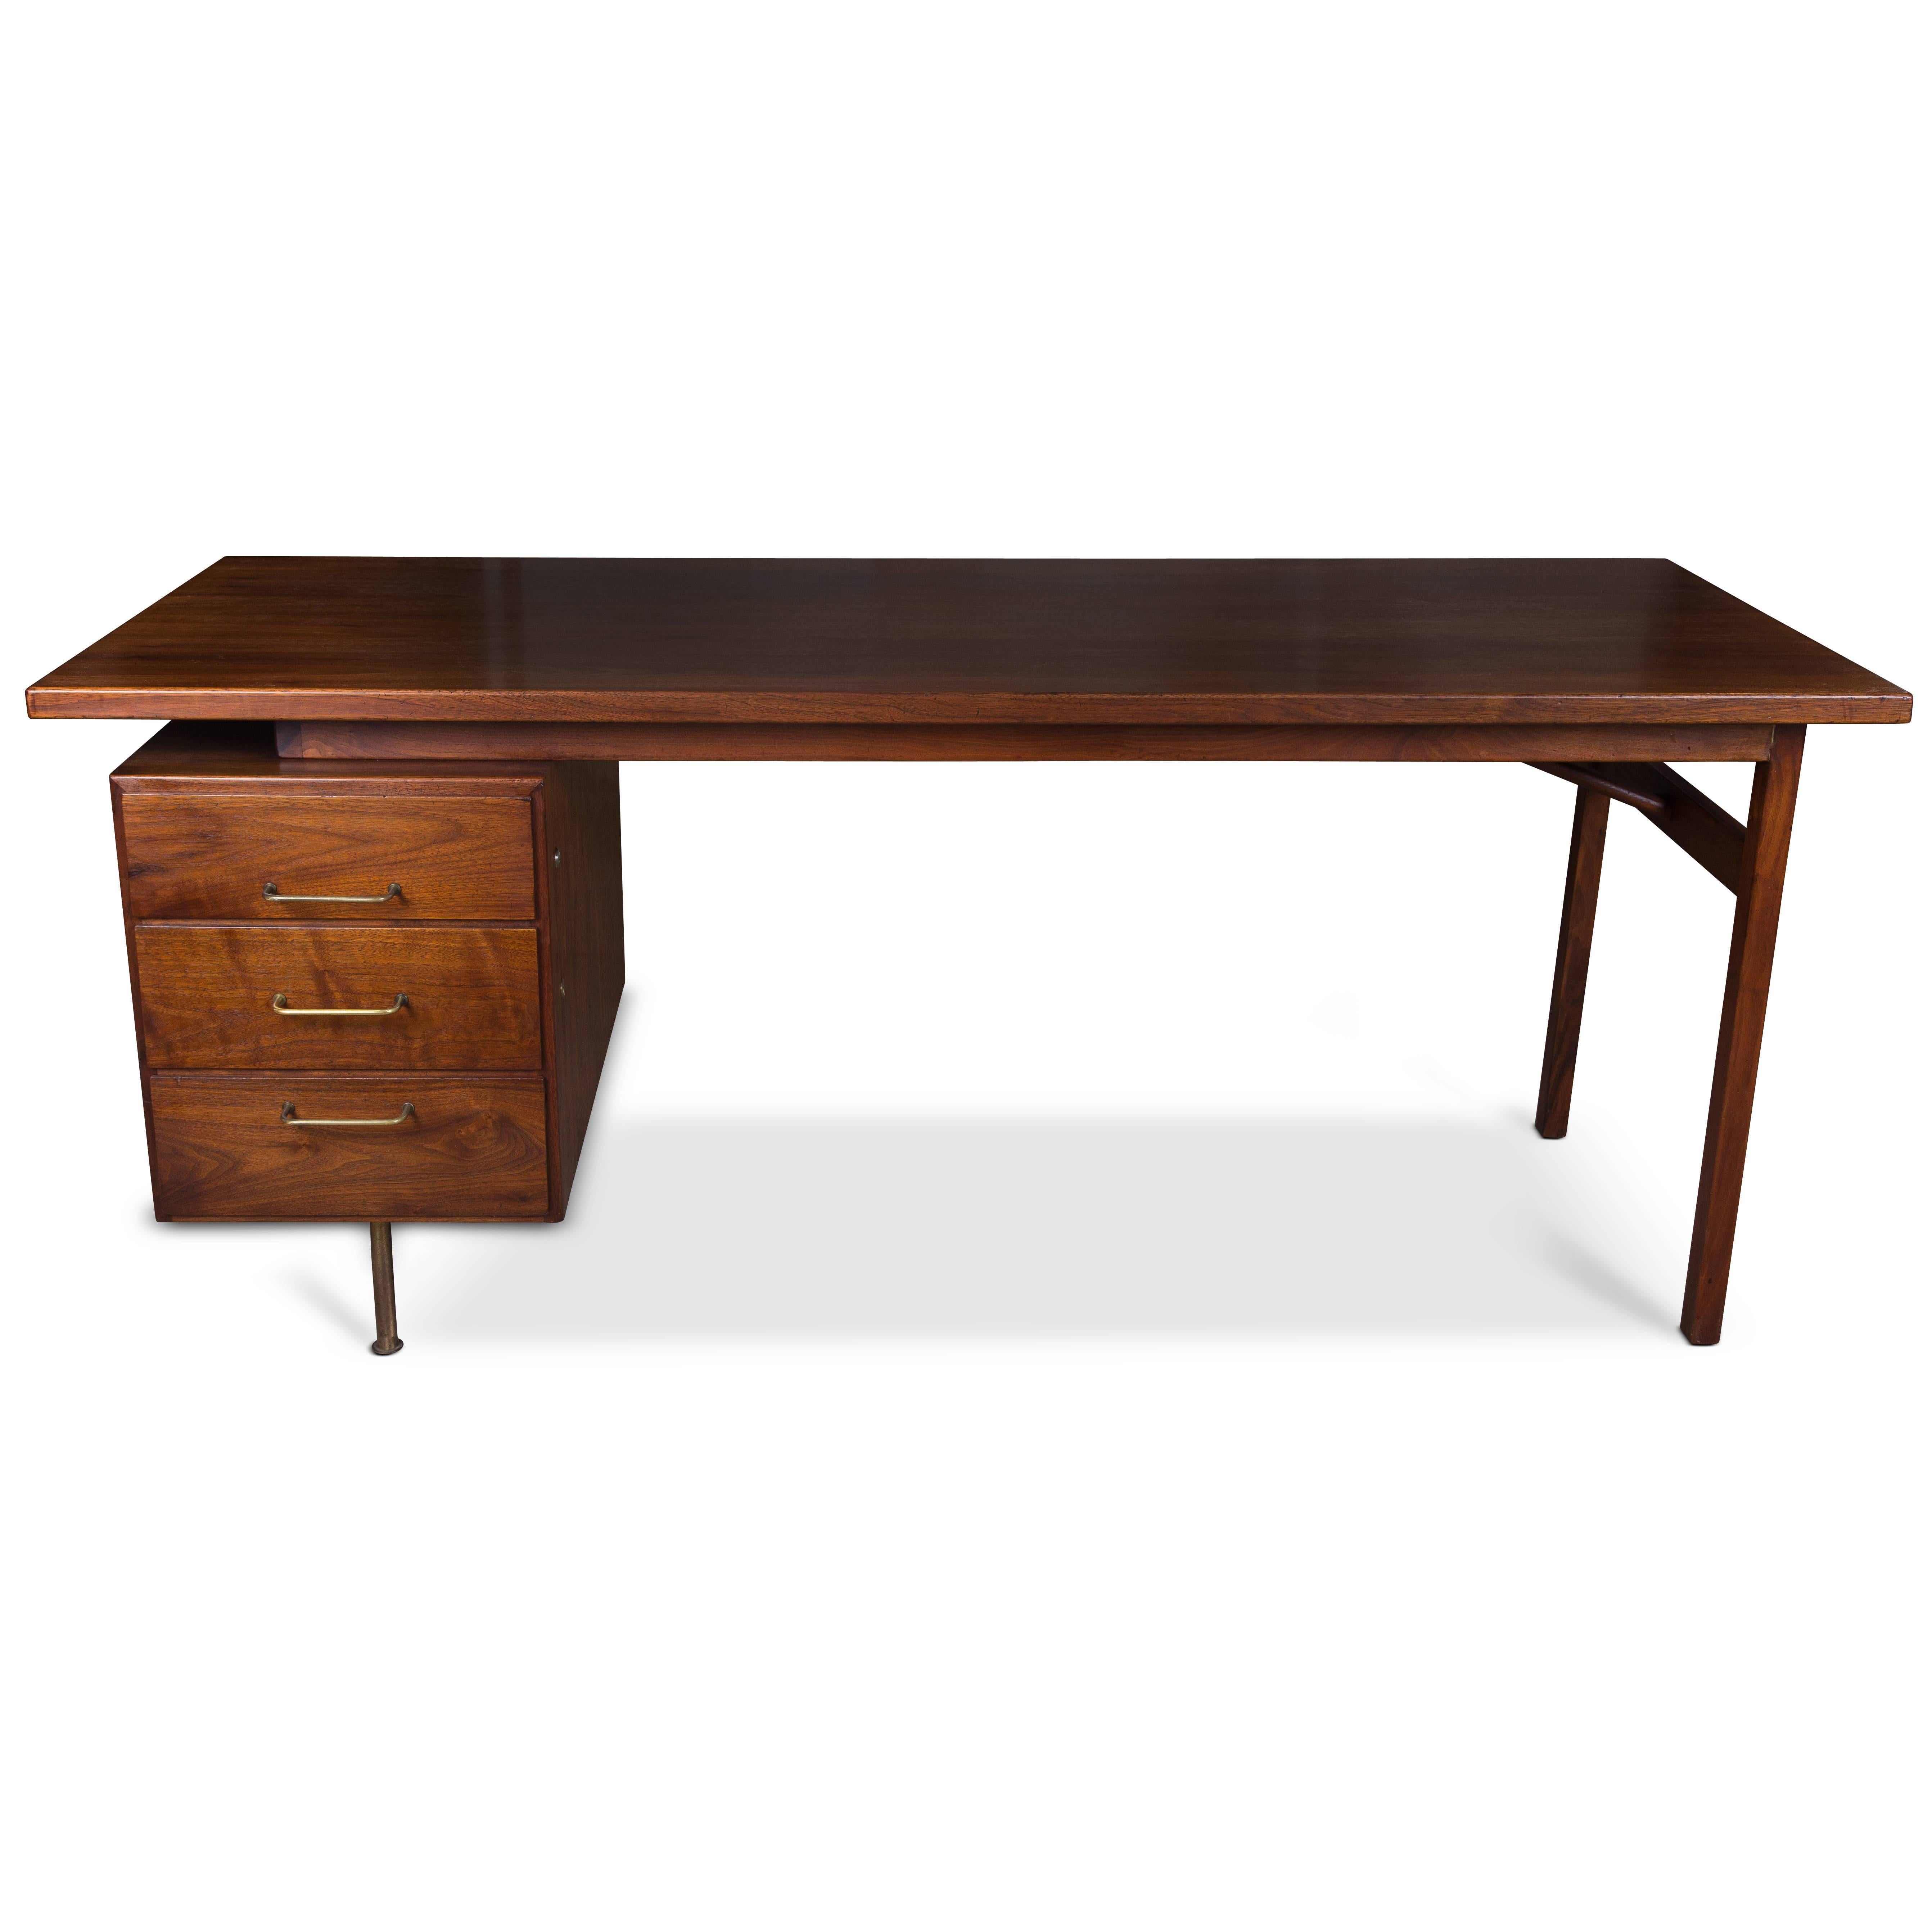 Rosewood desk with floating top and brass handles.